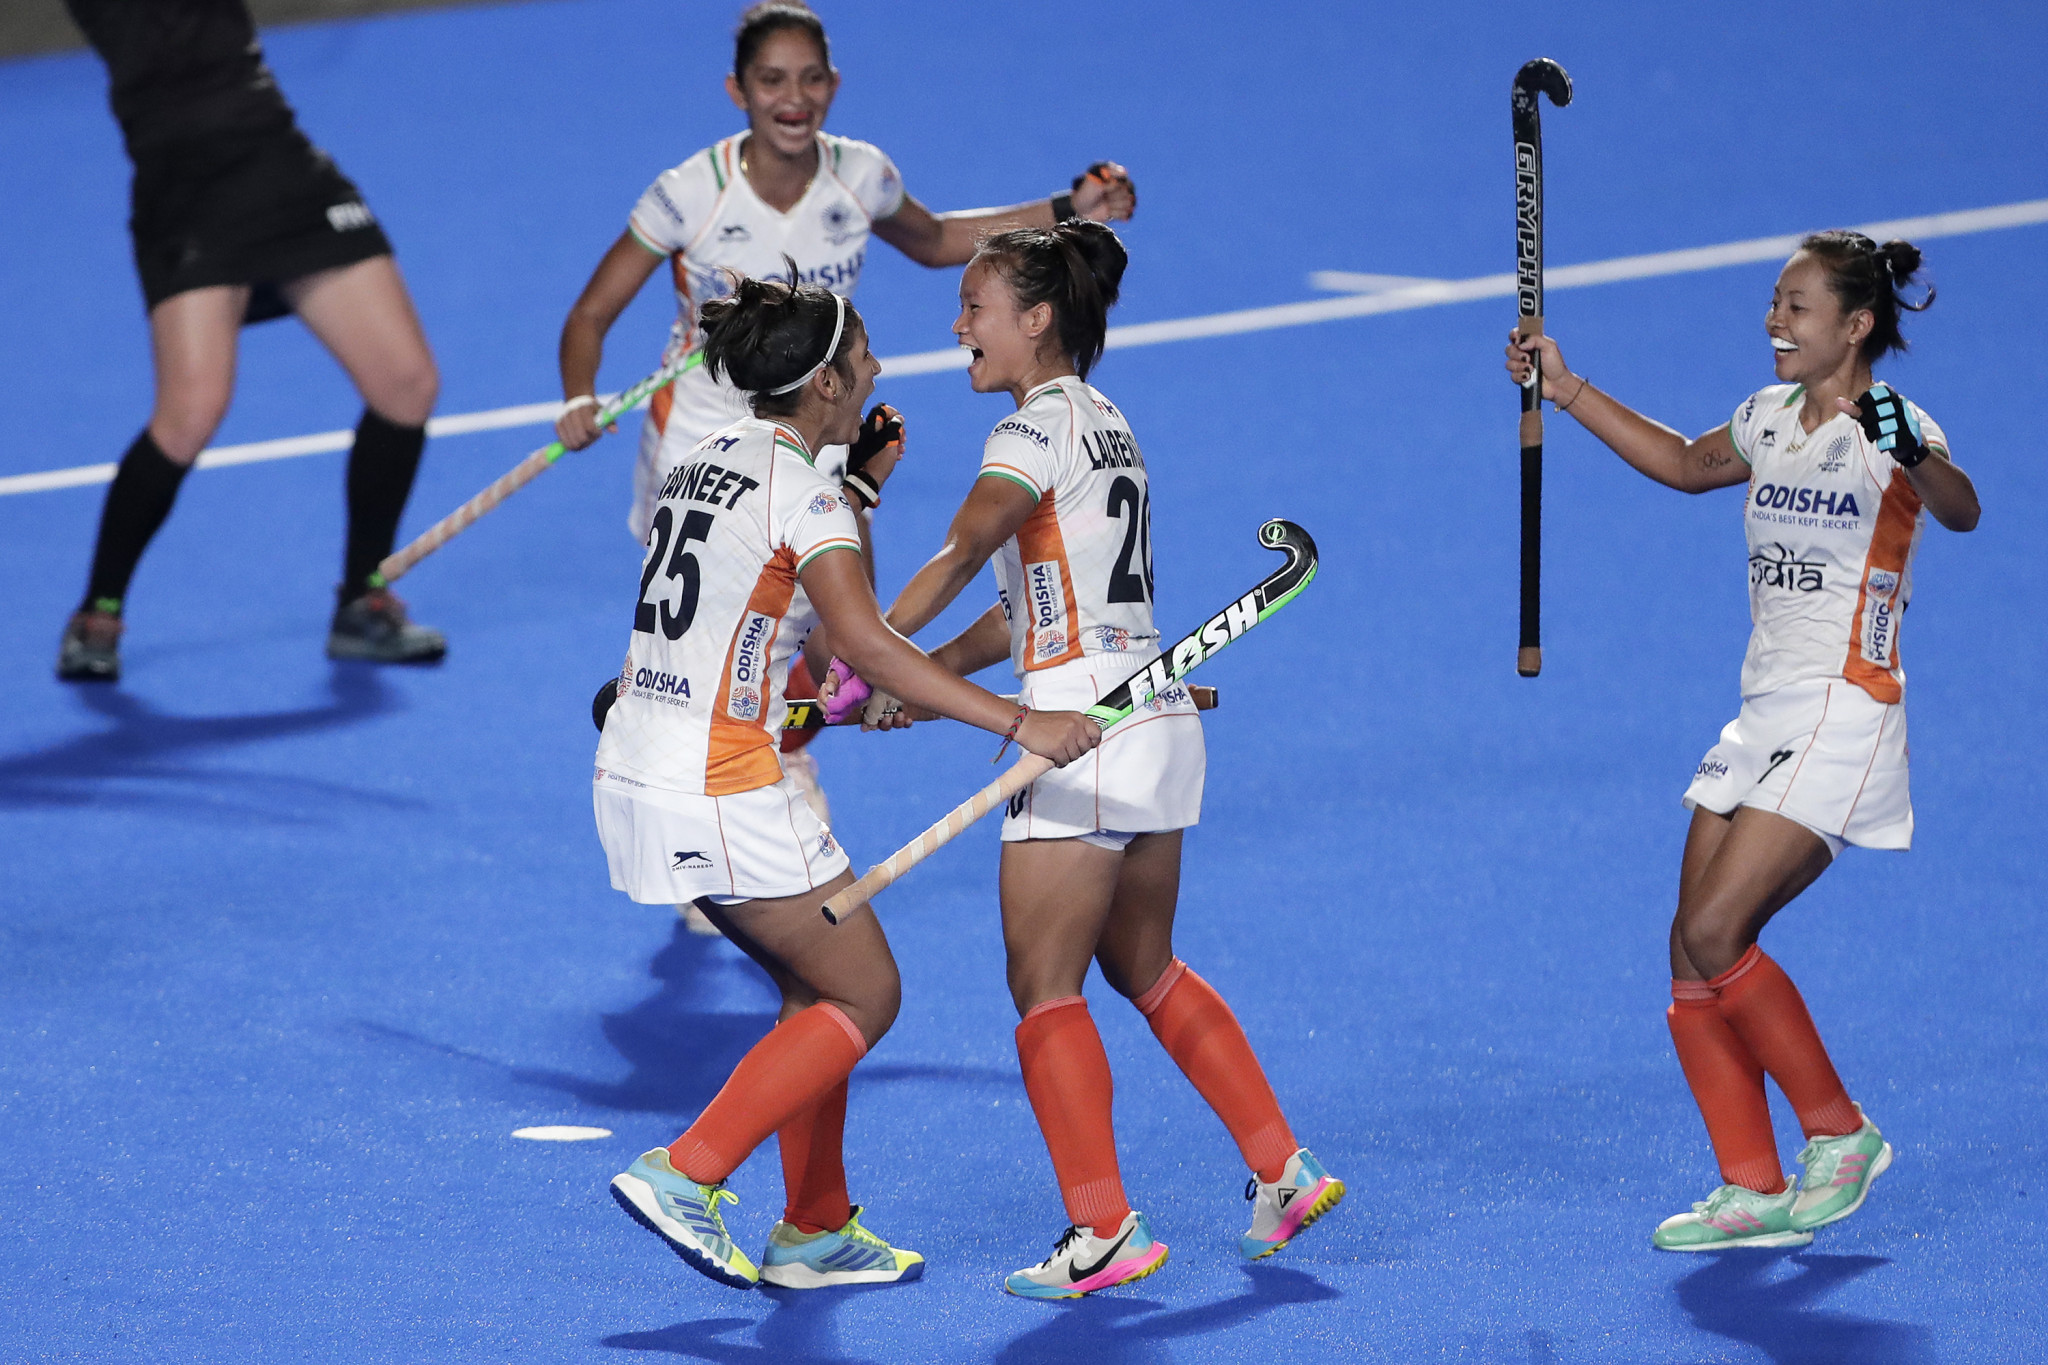 India has more than 100 athletes already qualified for Tokyo 2020, including the women's hockey team ©Getty Images